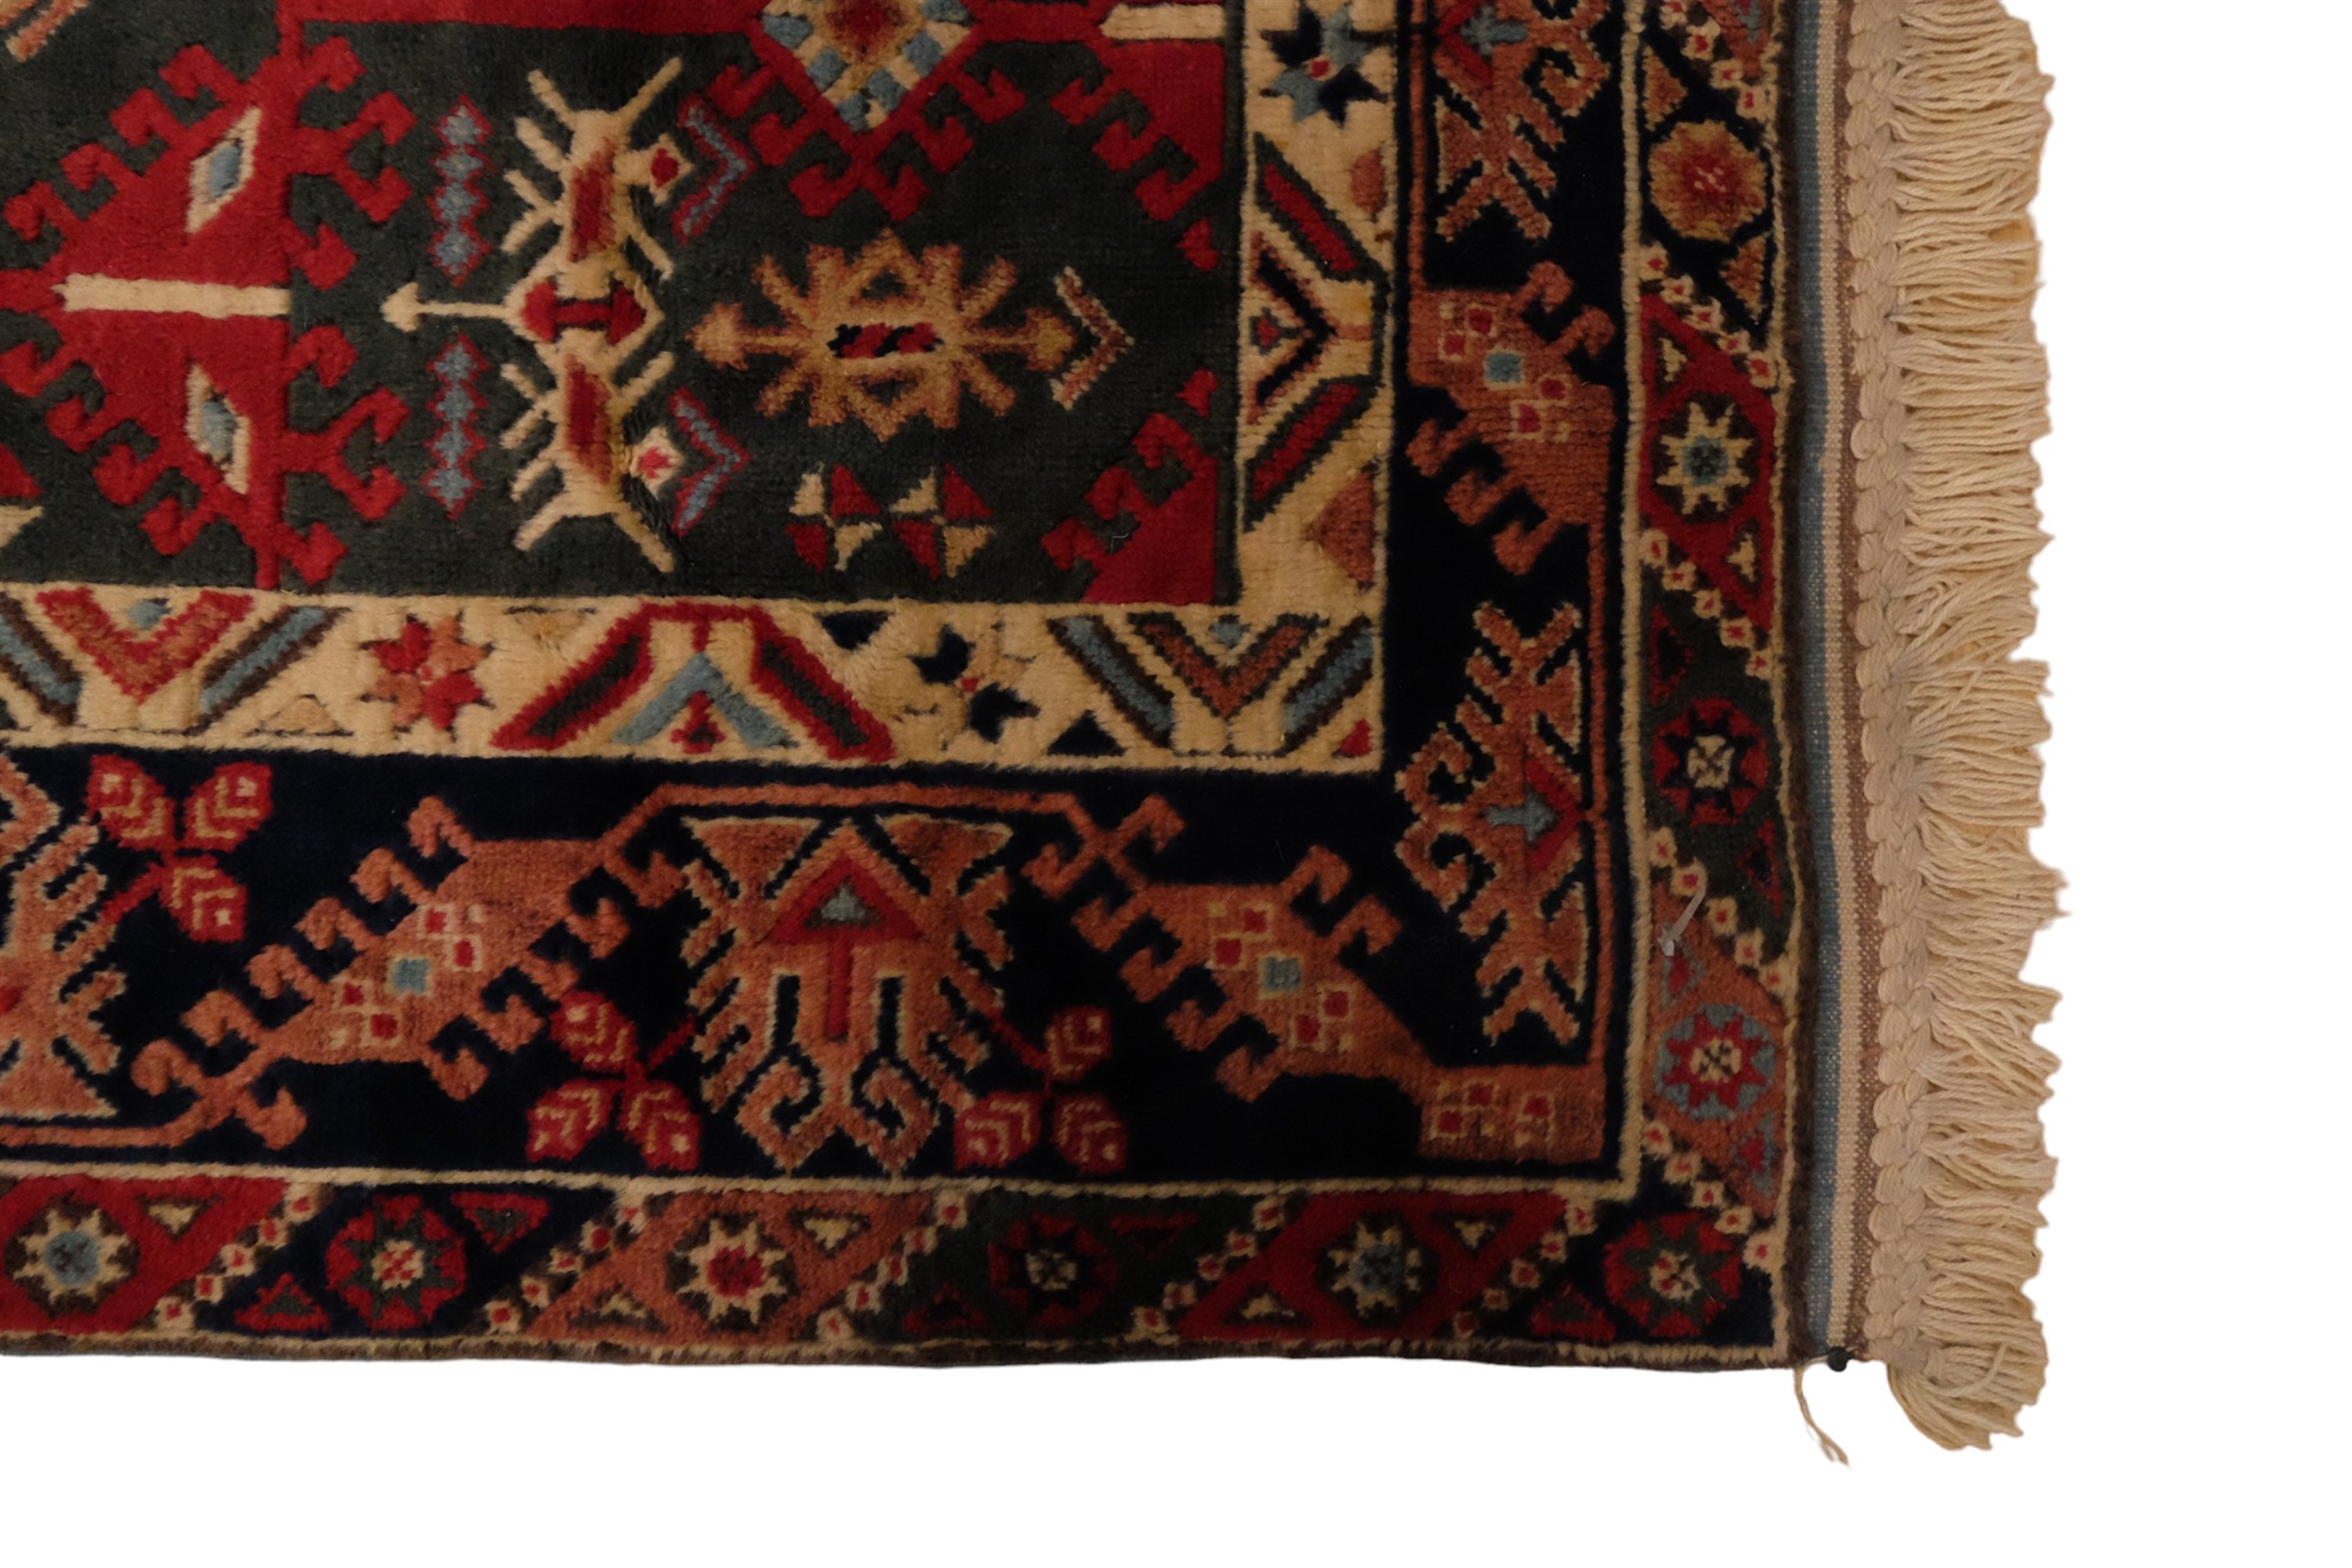 A Turkish (Dosemealti) hand-knotted wool-pile rug, with certificate, 185 x 125 cm - Image 2 of 4